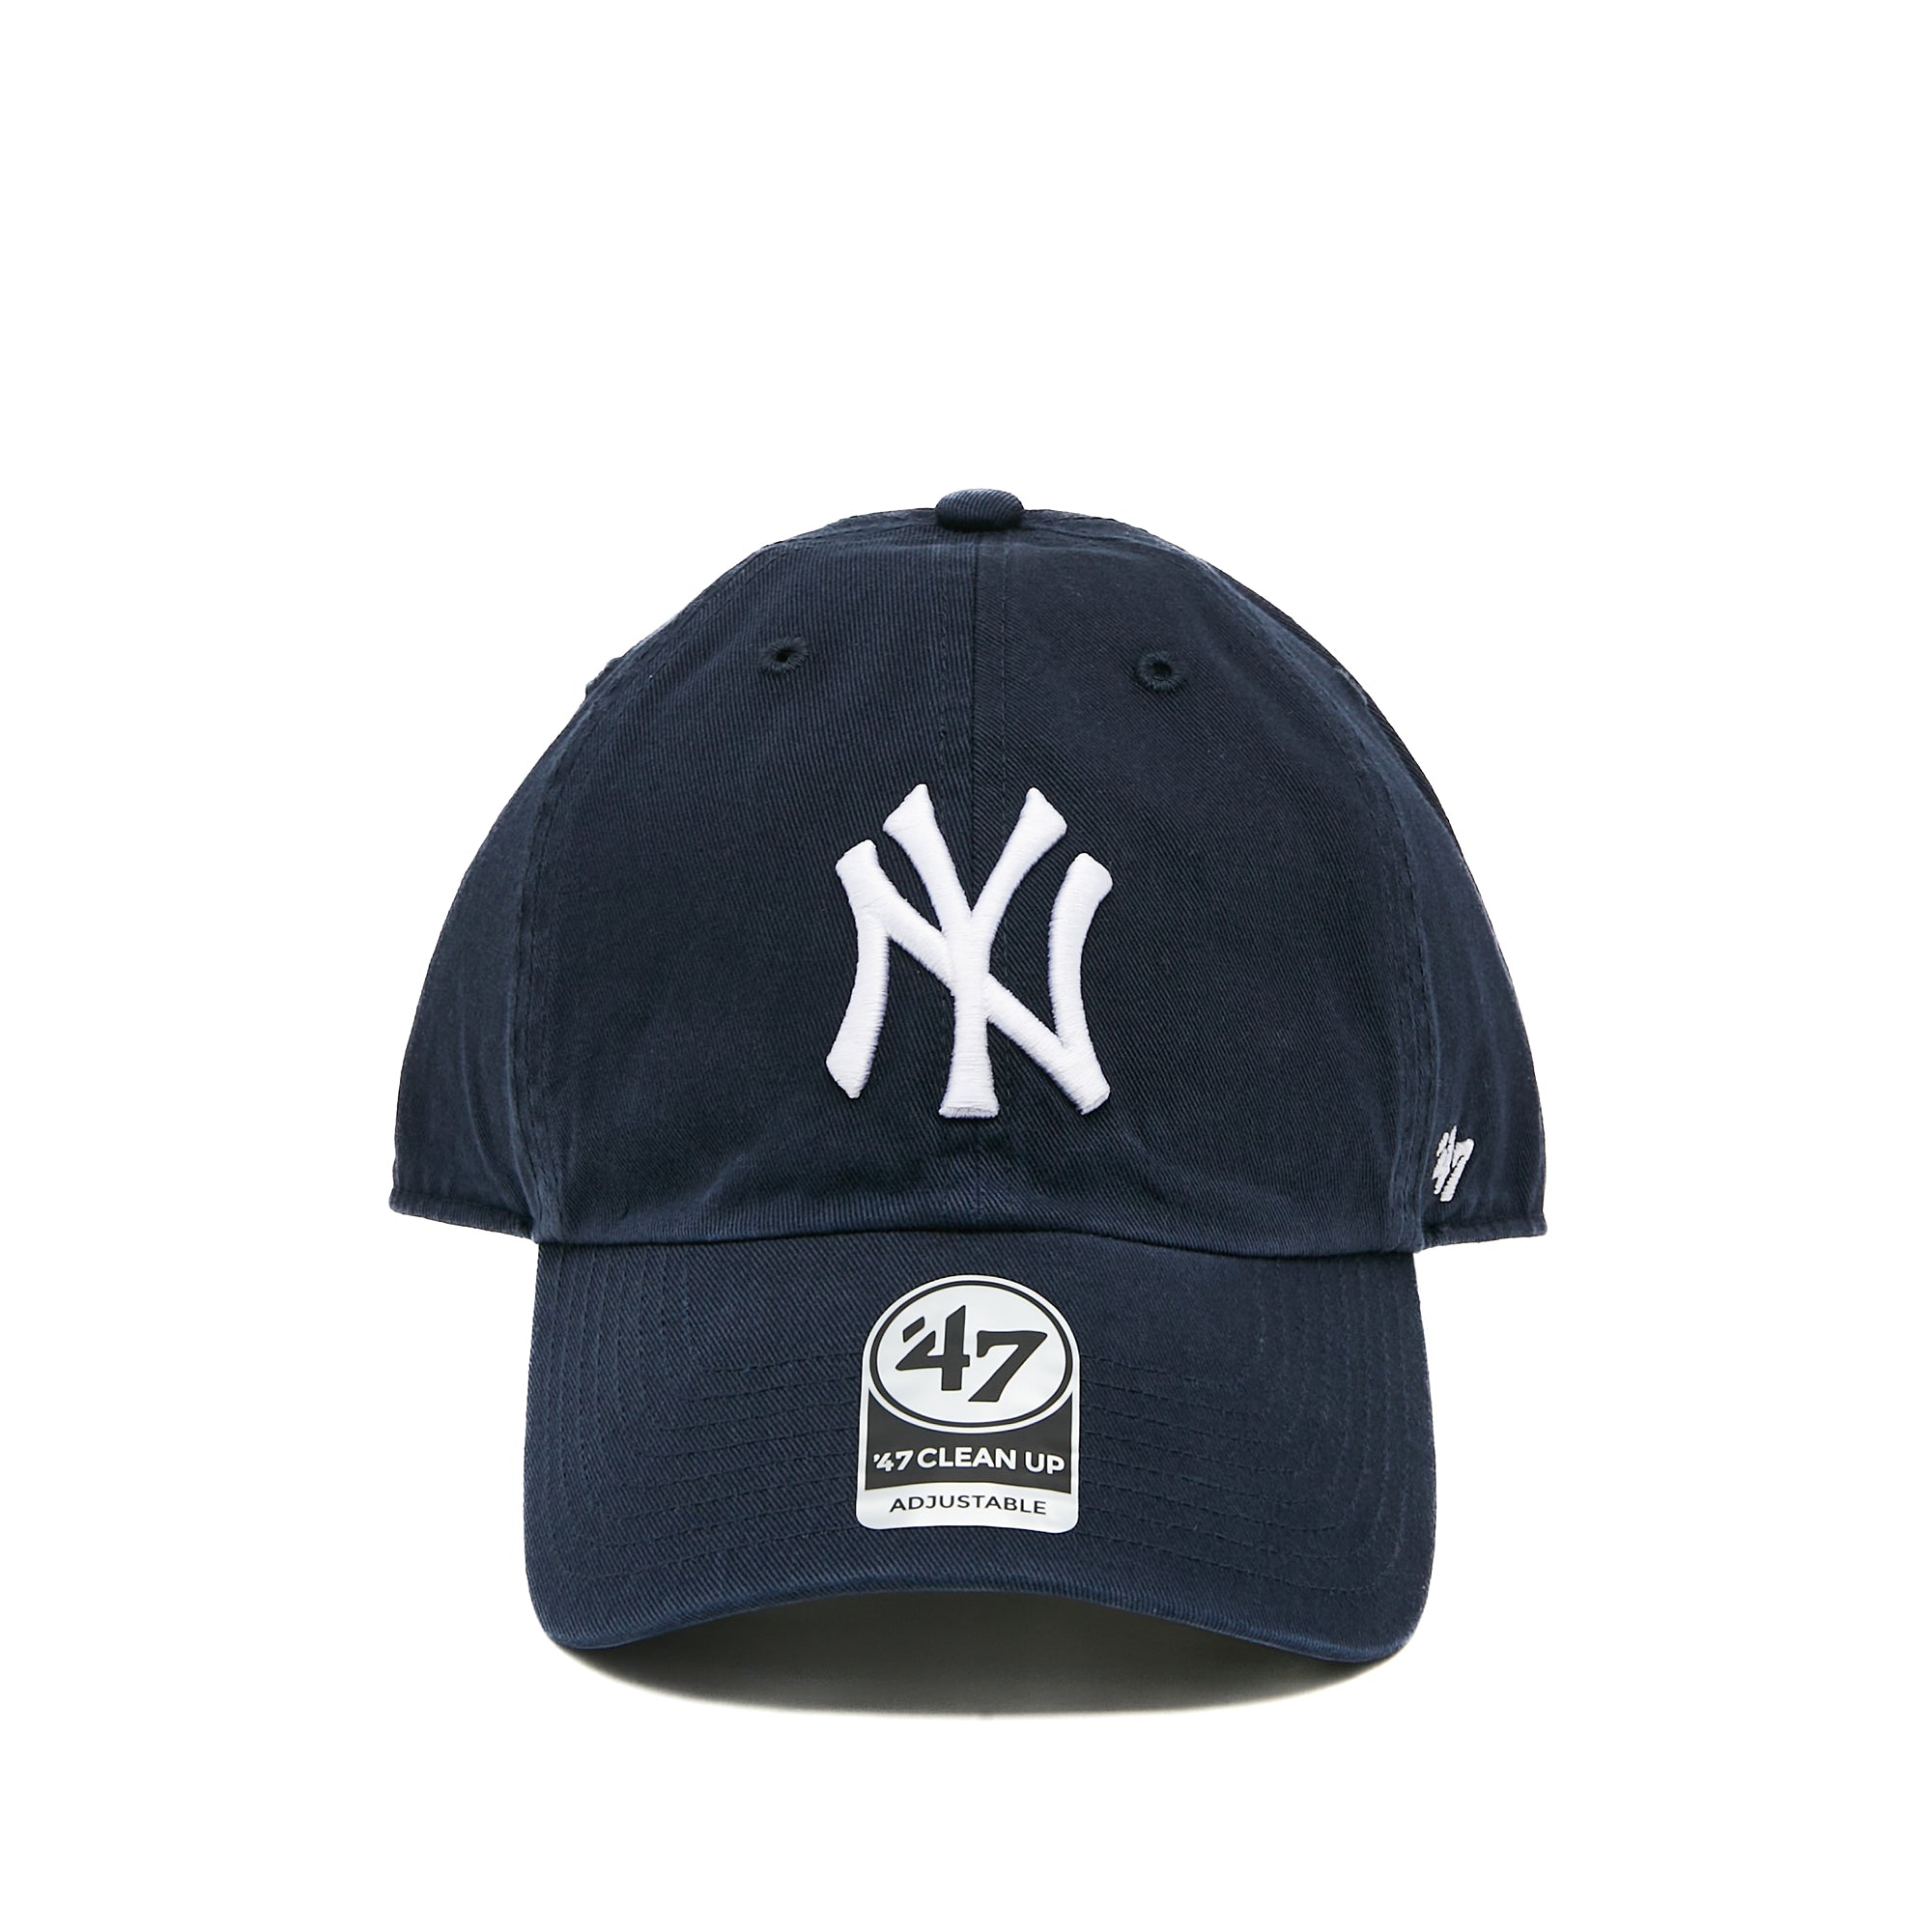 MLB New York Yankees '47 Clean Up Cap Navy One Size